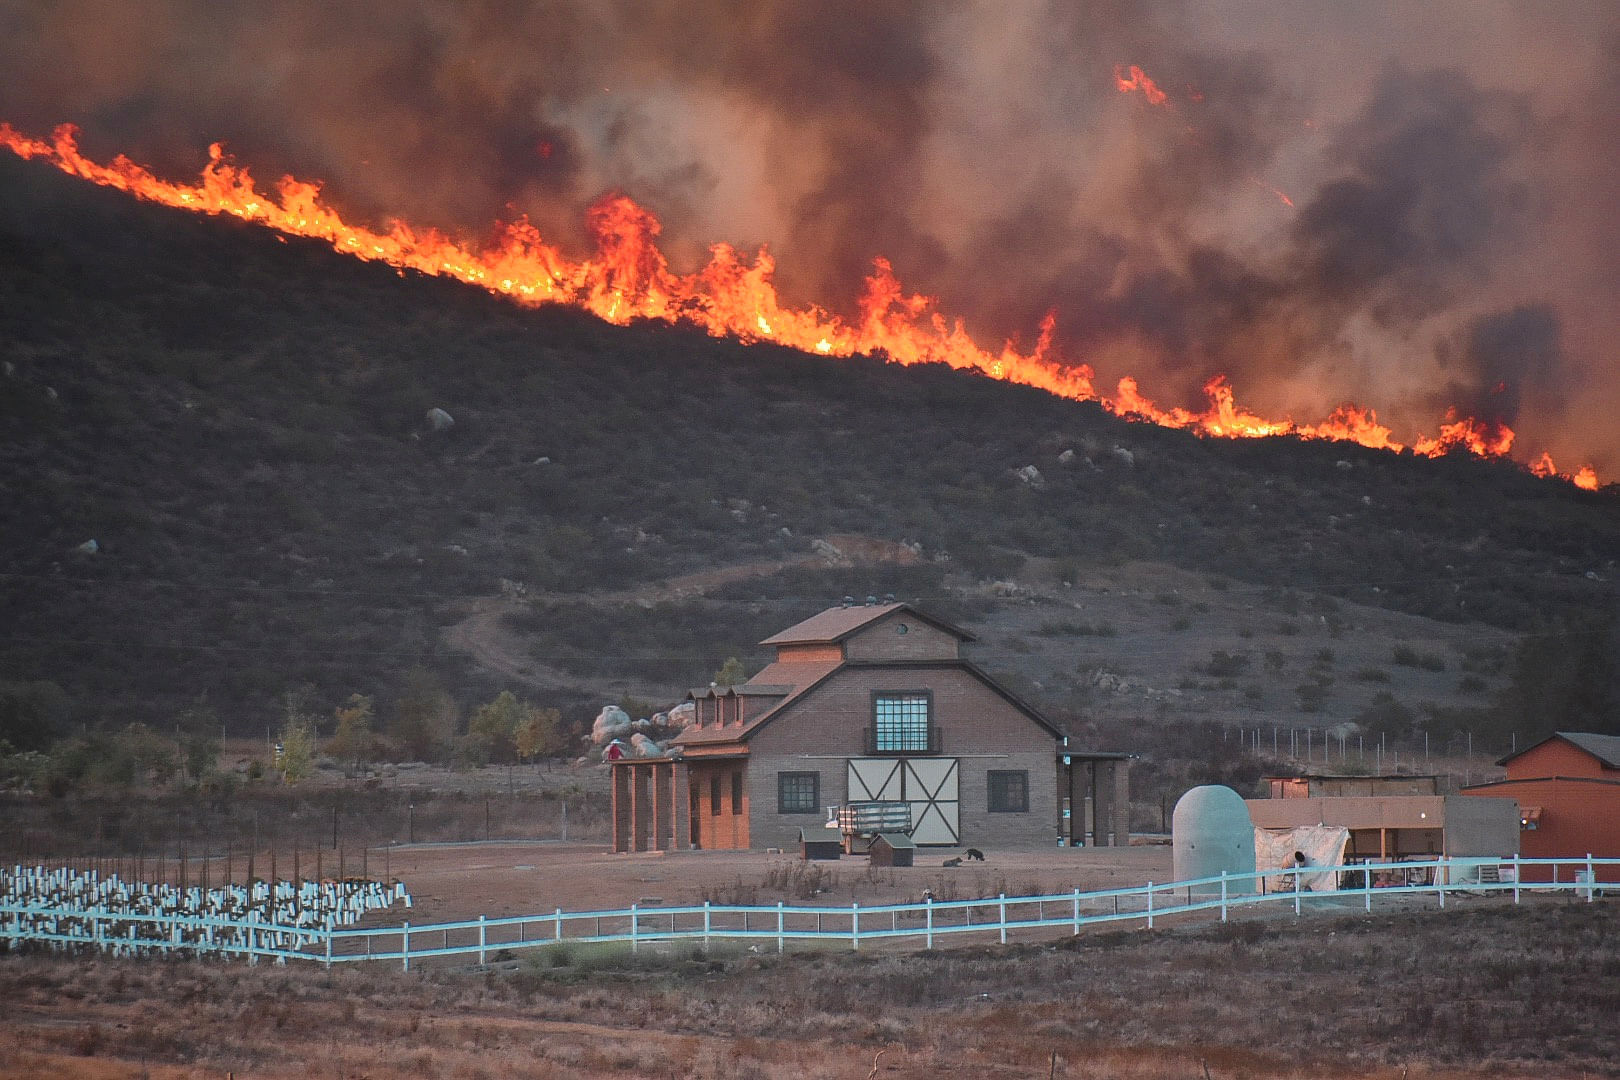 A fire burns in Valle de Guadalupe, Baja California, Mexico October 25, 2019 in this picture obtained from social media. (Reuters Photo)